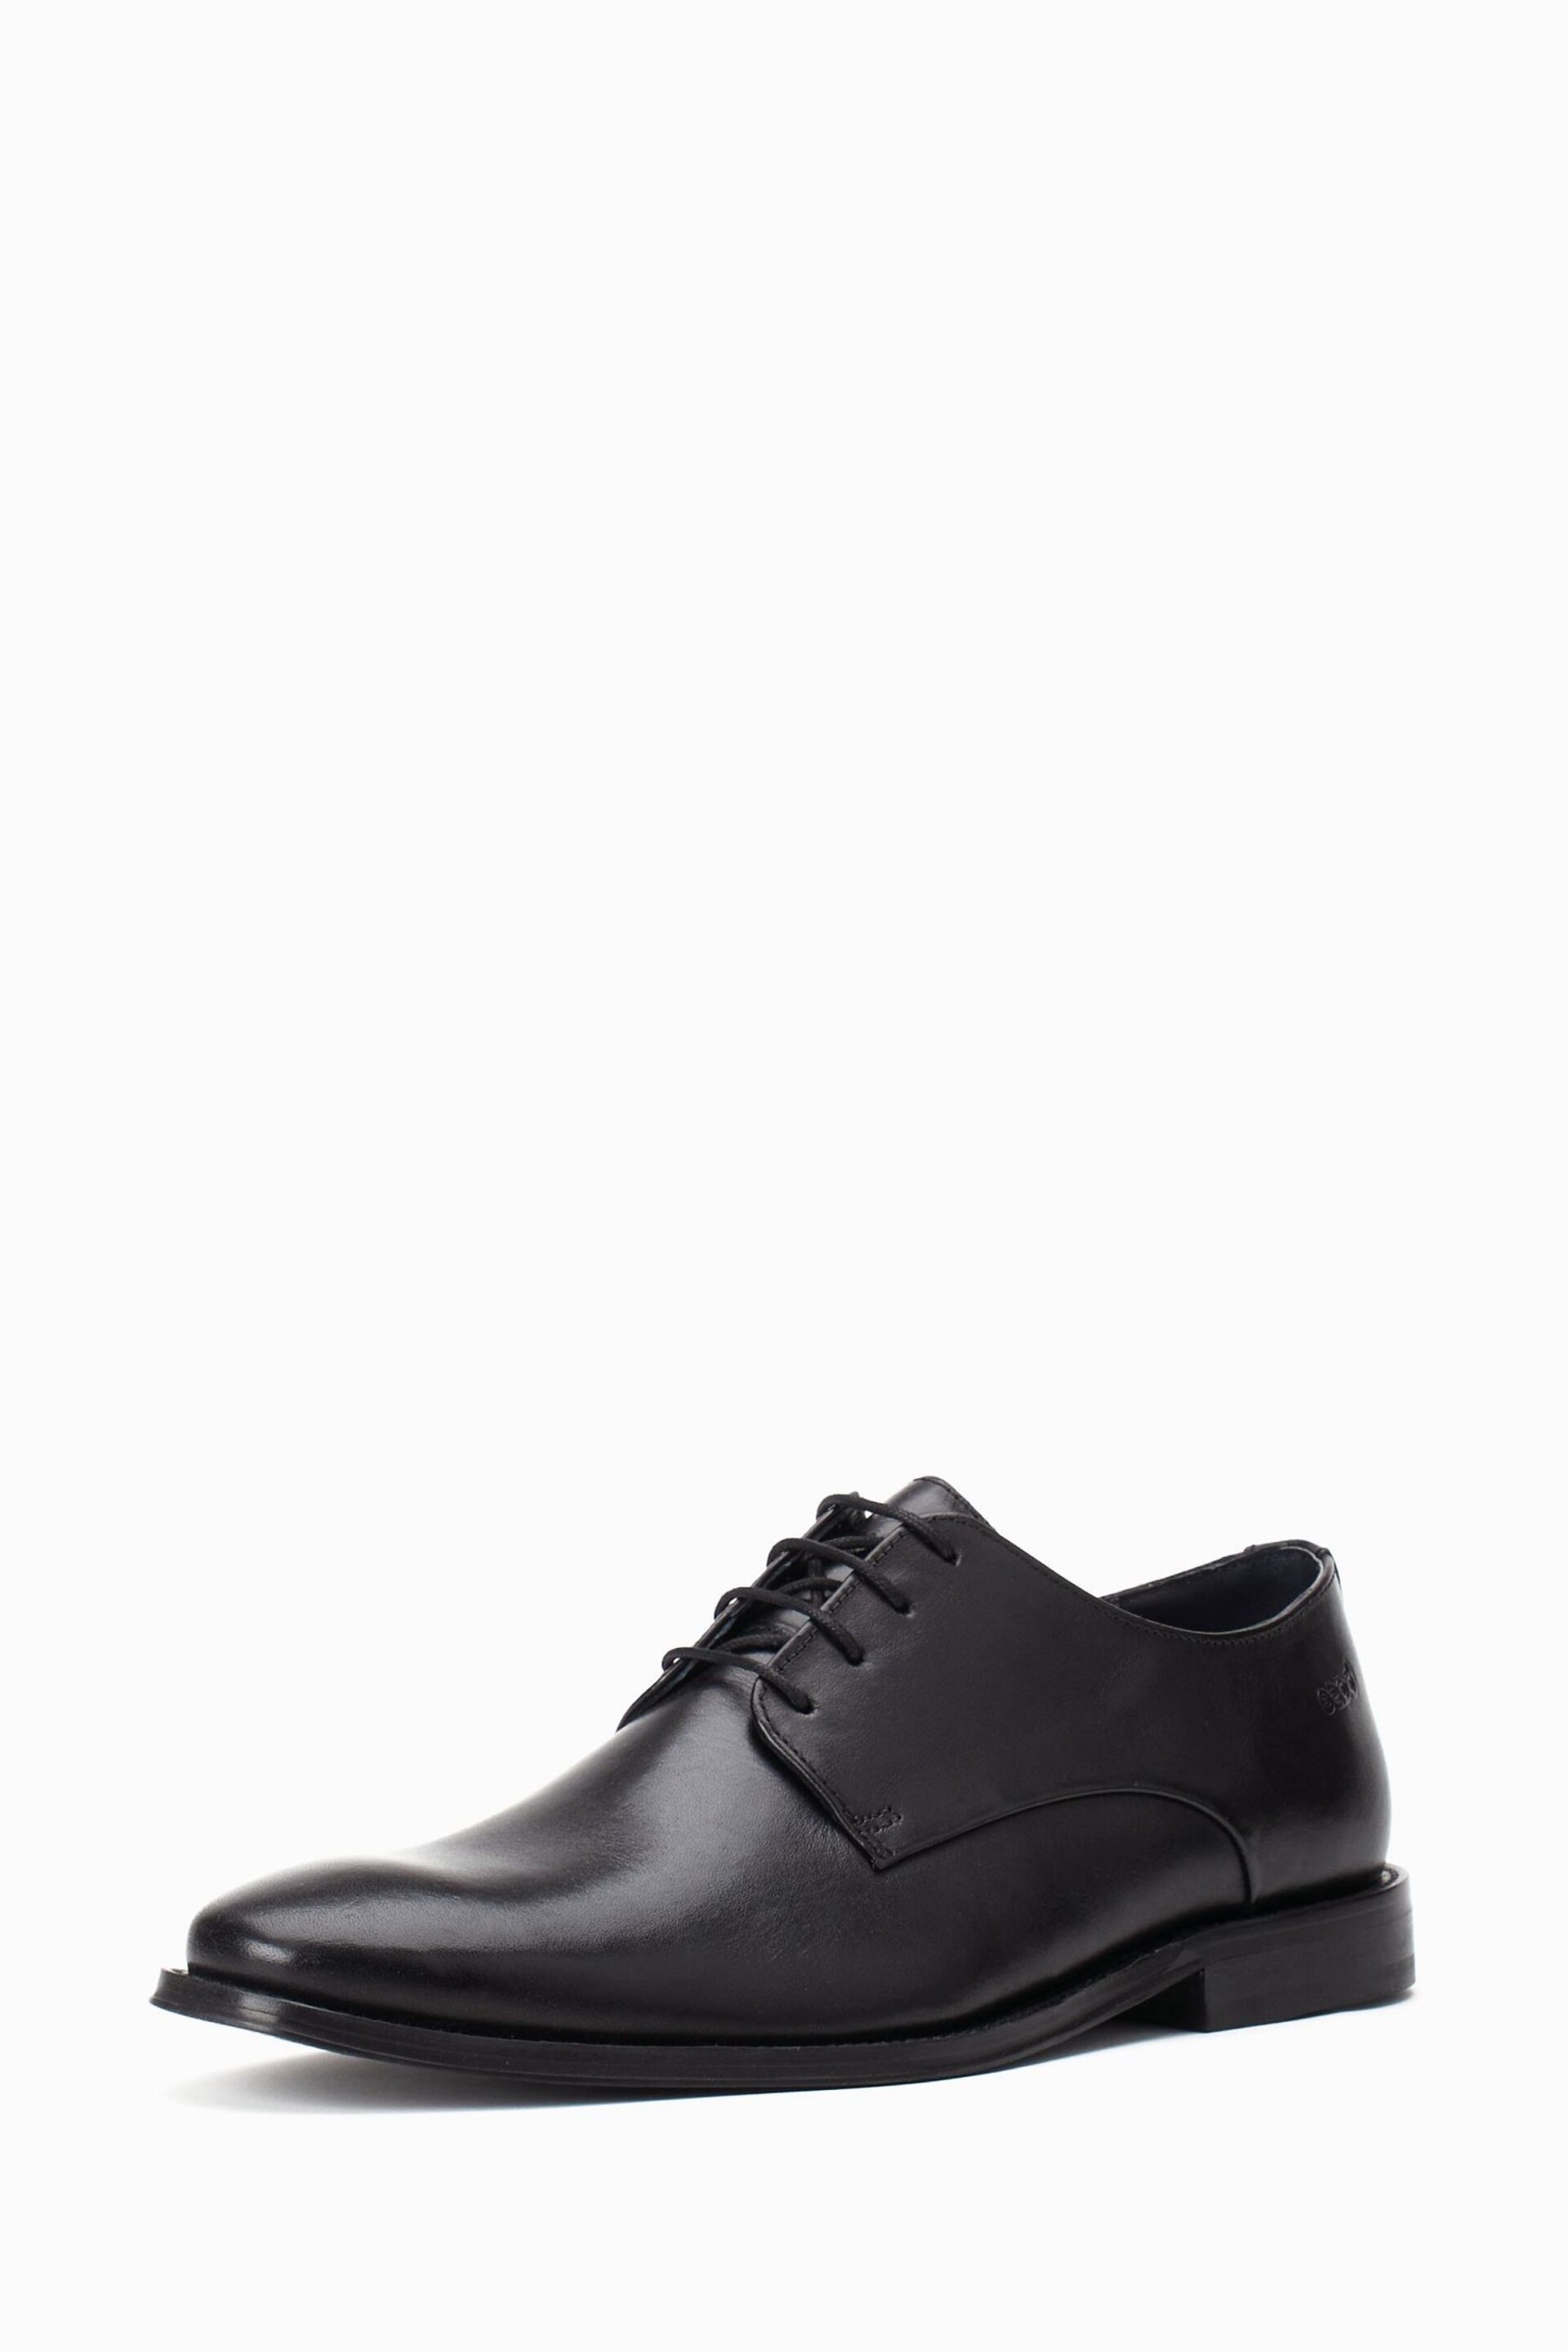 Base London Marley Derby Shoes - Image 3 of 5